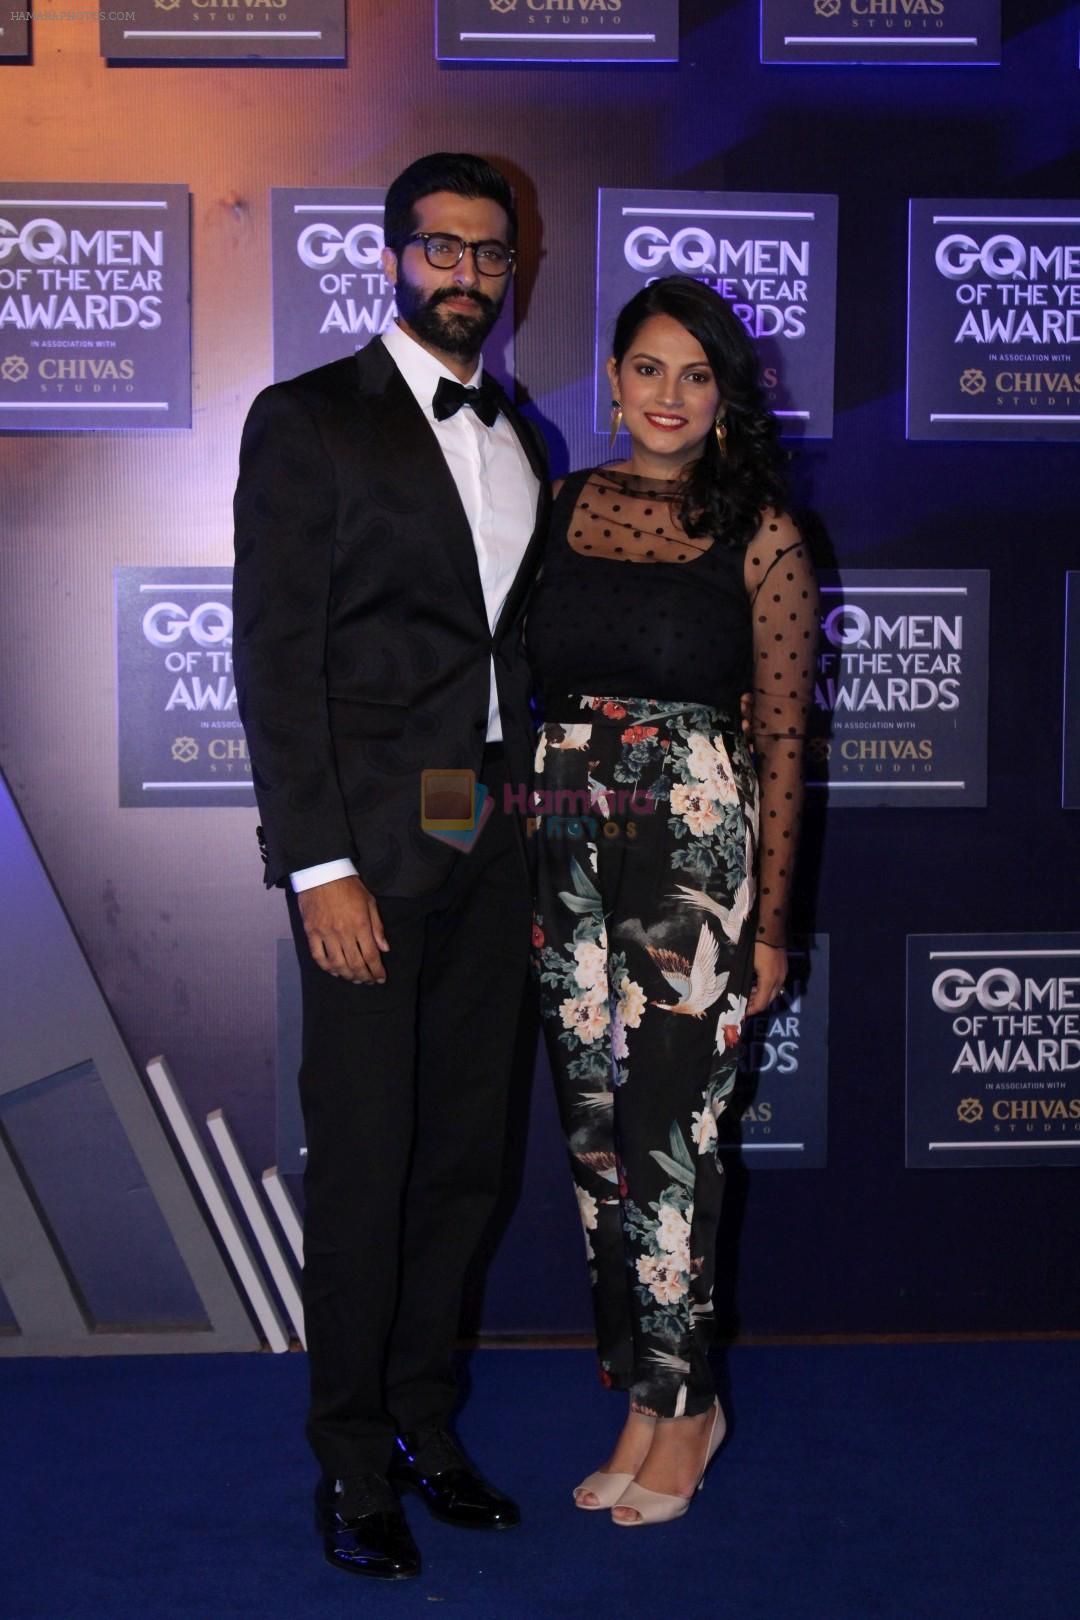 Akshay Oberoi At Red Carpet Of GQ Men Of The Year Awards 2017 on 22nd Sept 2017